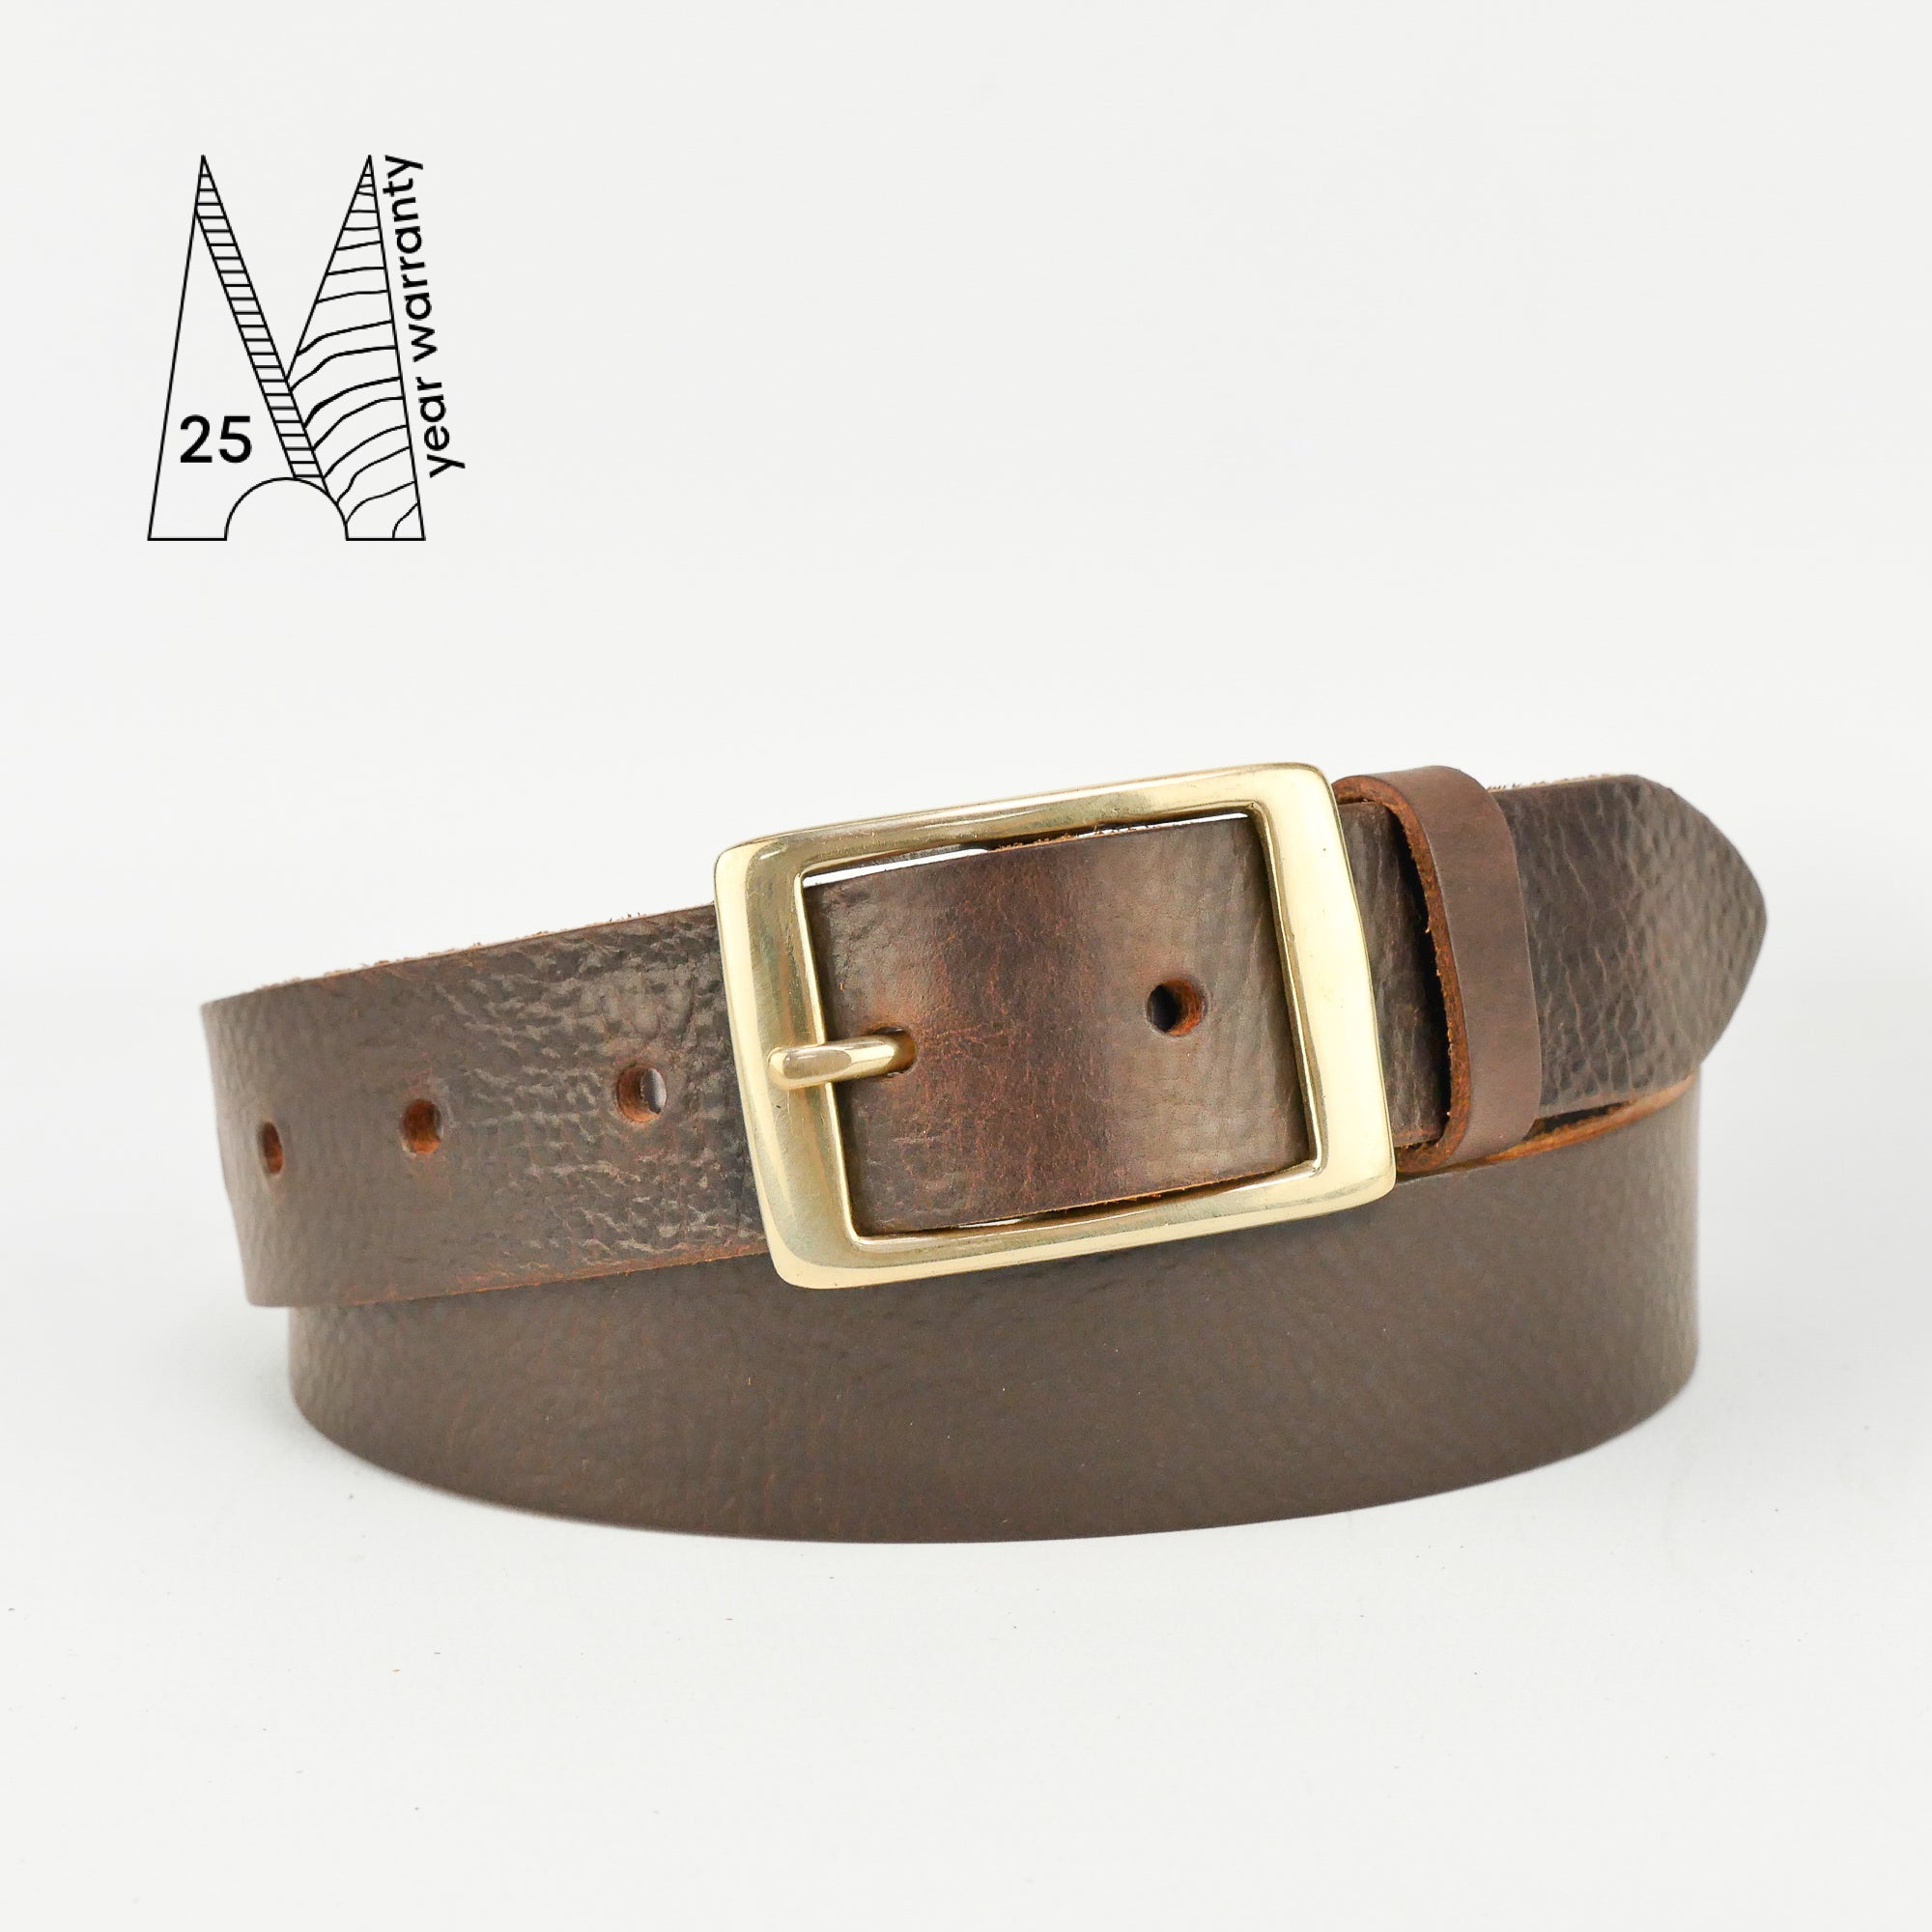 1 1/4" Classic Brown Leather Belt